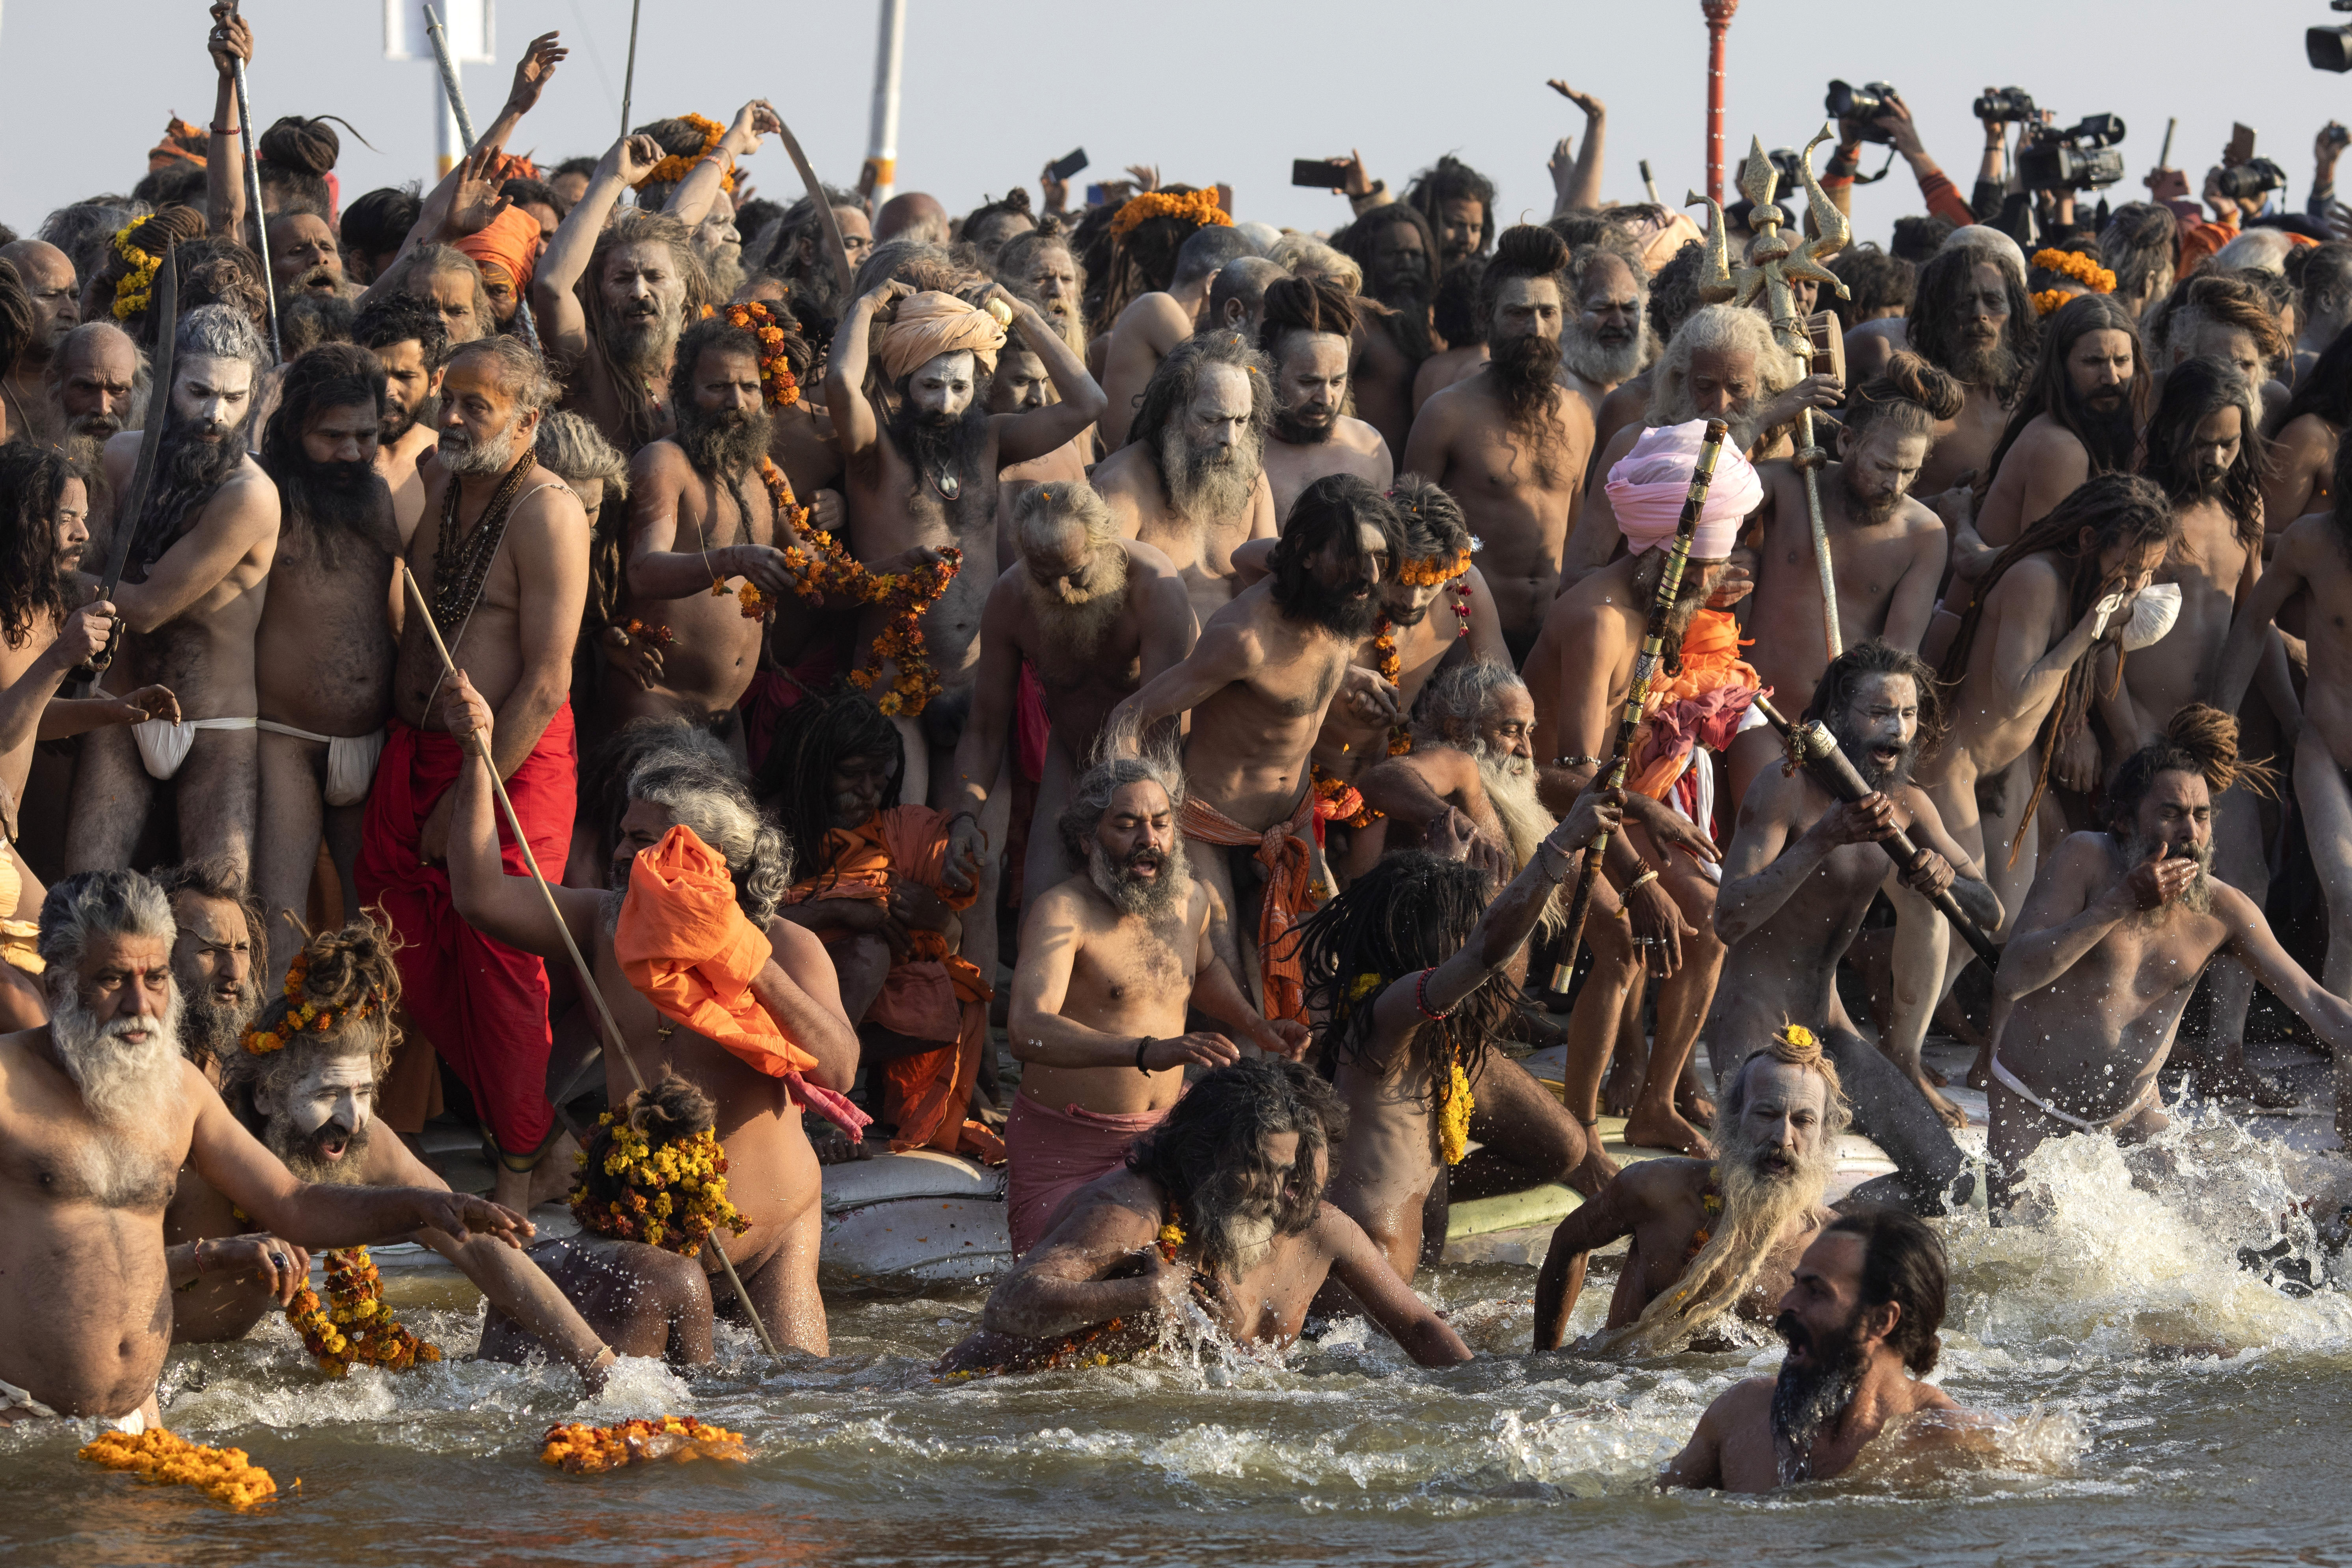 Hindu holy men take a dip on auspicious Makar Sankranti day during the Kumbh Mela, or pitcher festival in Prayagraj, Uttar Pradesh state, India, Tuesday, Jan.15, 2019. The Kumbh Mela is a series of ritual baths by Hindu holy men, and other pilgrims at the confluence of three sacred rivers the Yamuna, the Ganges and the mythical Saraswati  that dates back to at least medieval times. The city's Mughal-era name Allahabad was recently changed to Prayagraj. (AP Photo/Bernat Armangue)